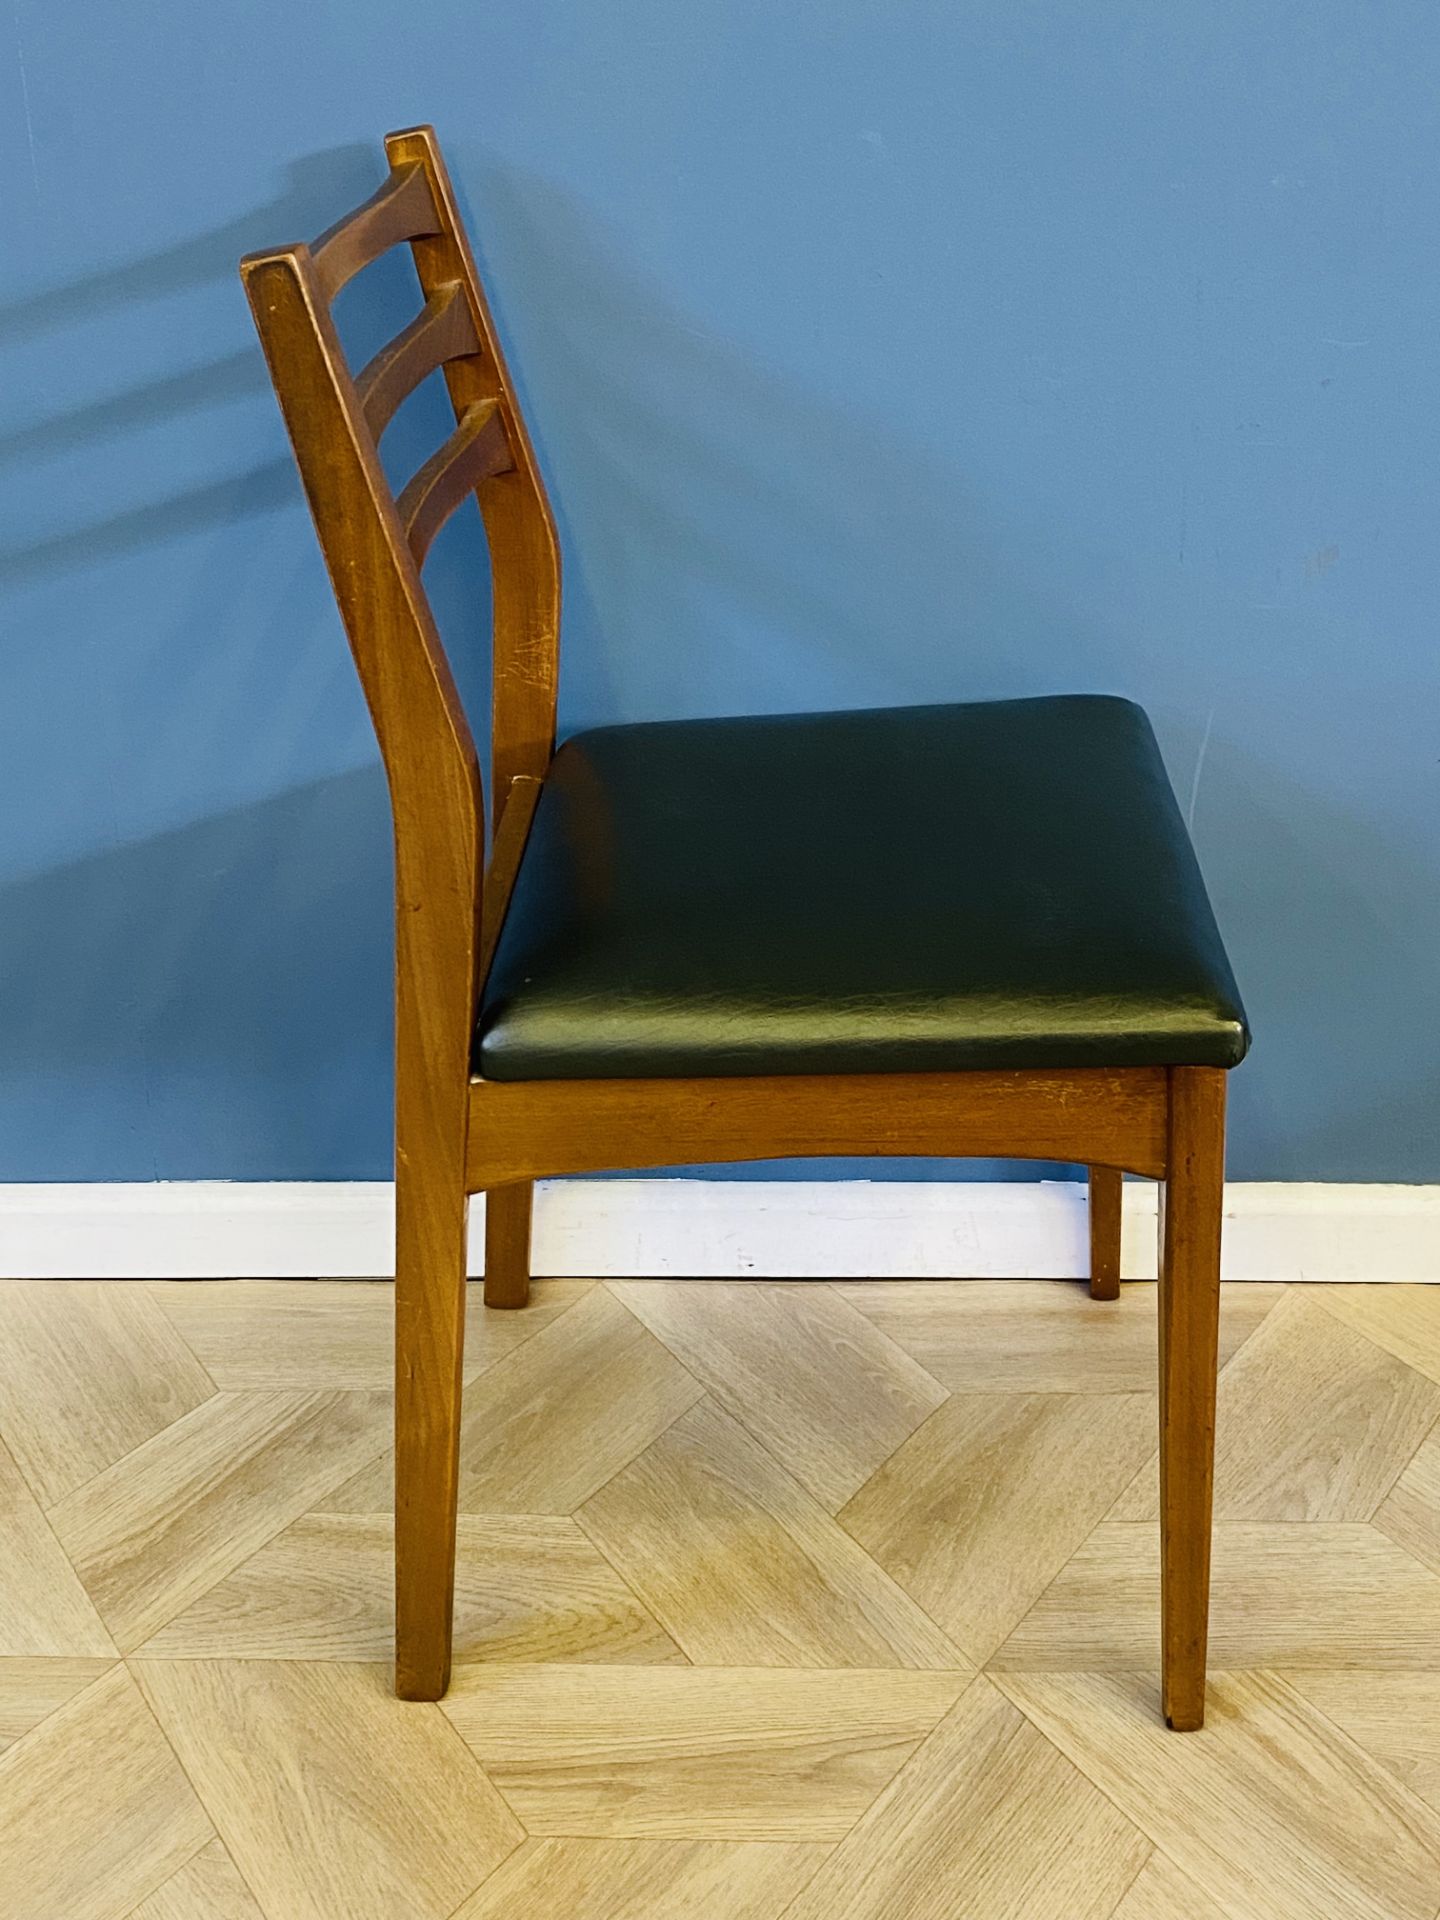 Set of four mid century teak dining chairs - Image 5 of 6